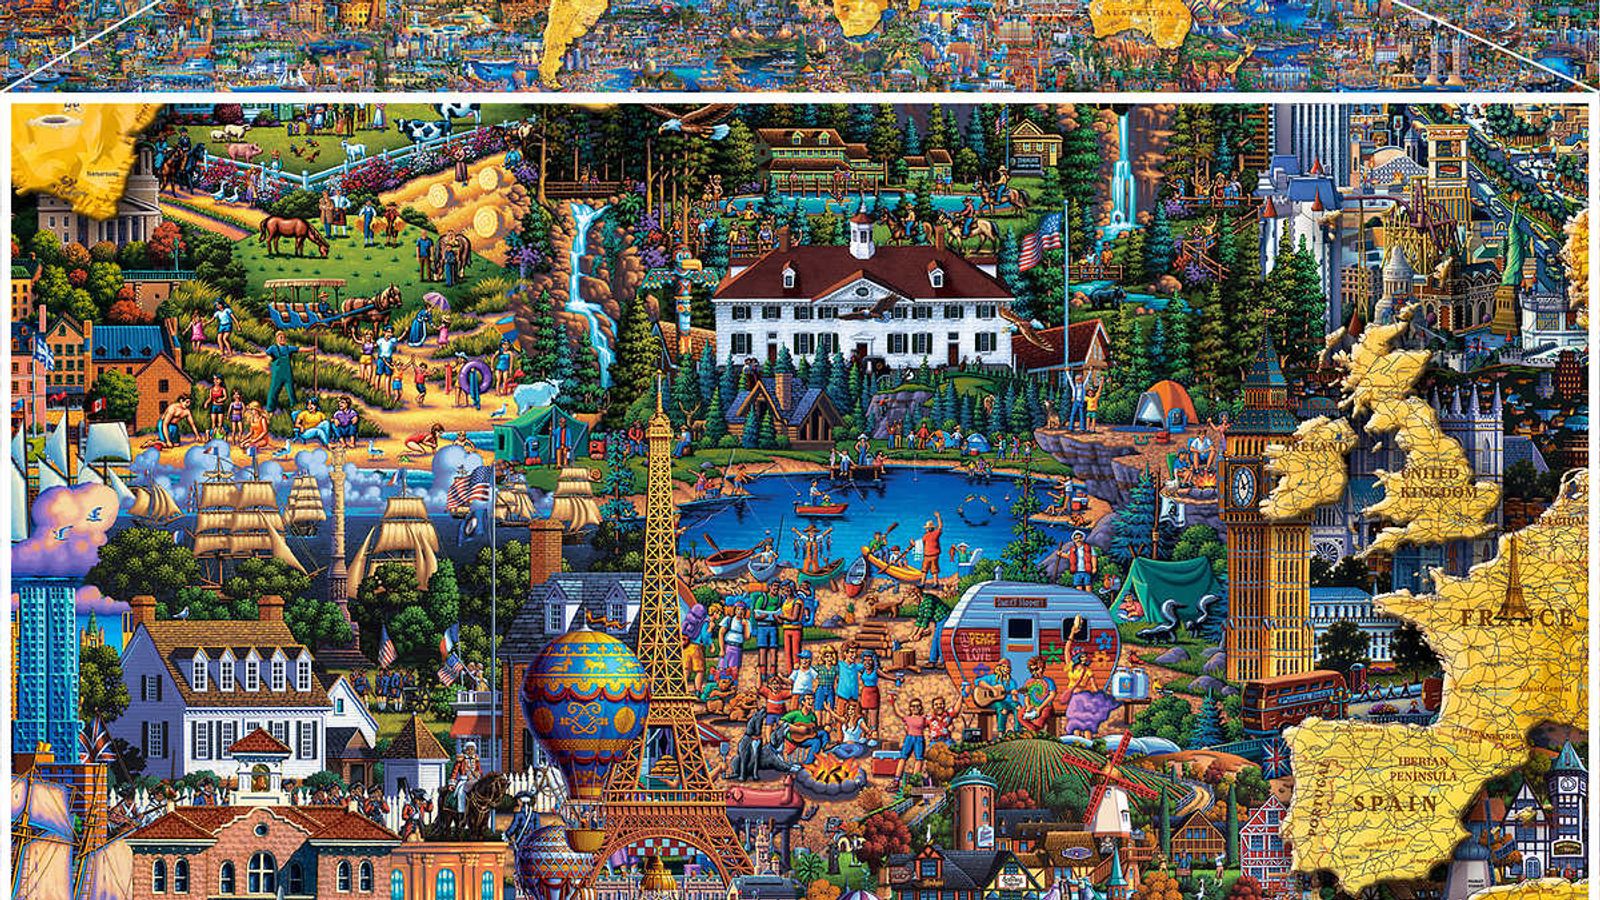 World's largest puzzle goes on sale at Costco - here's how much it